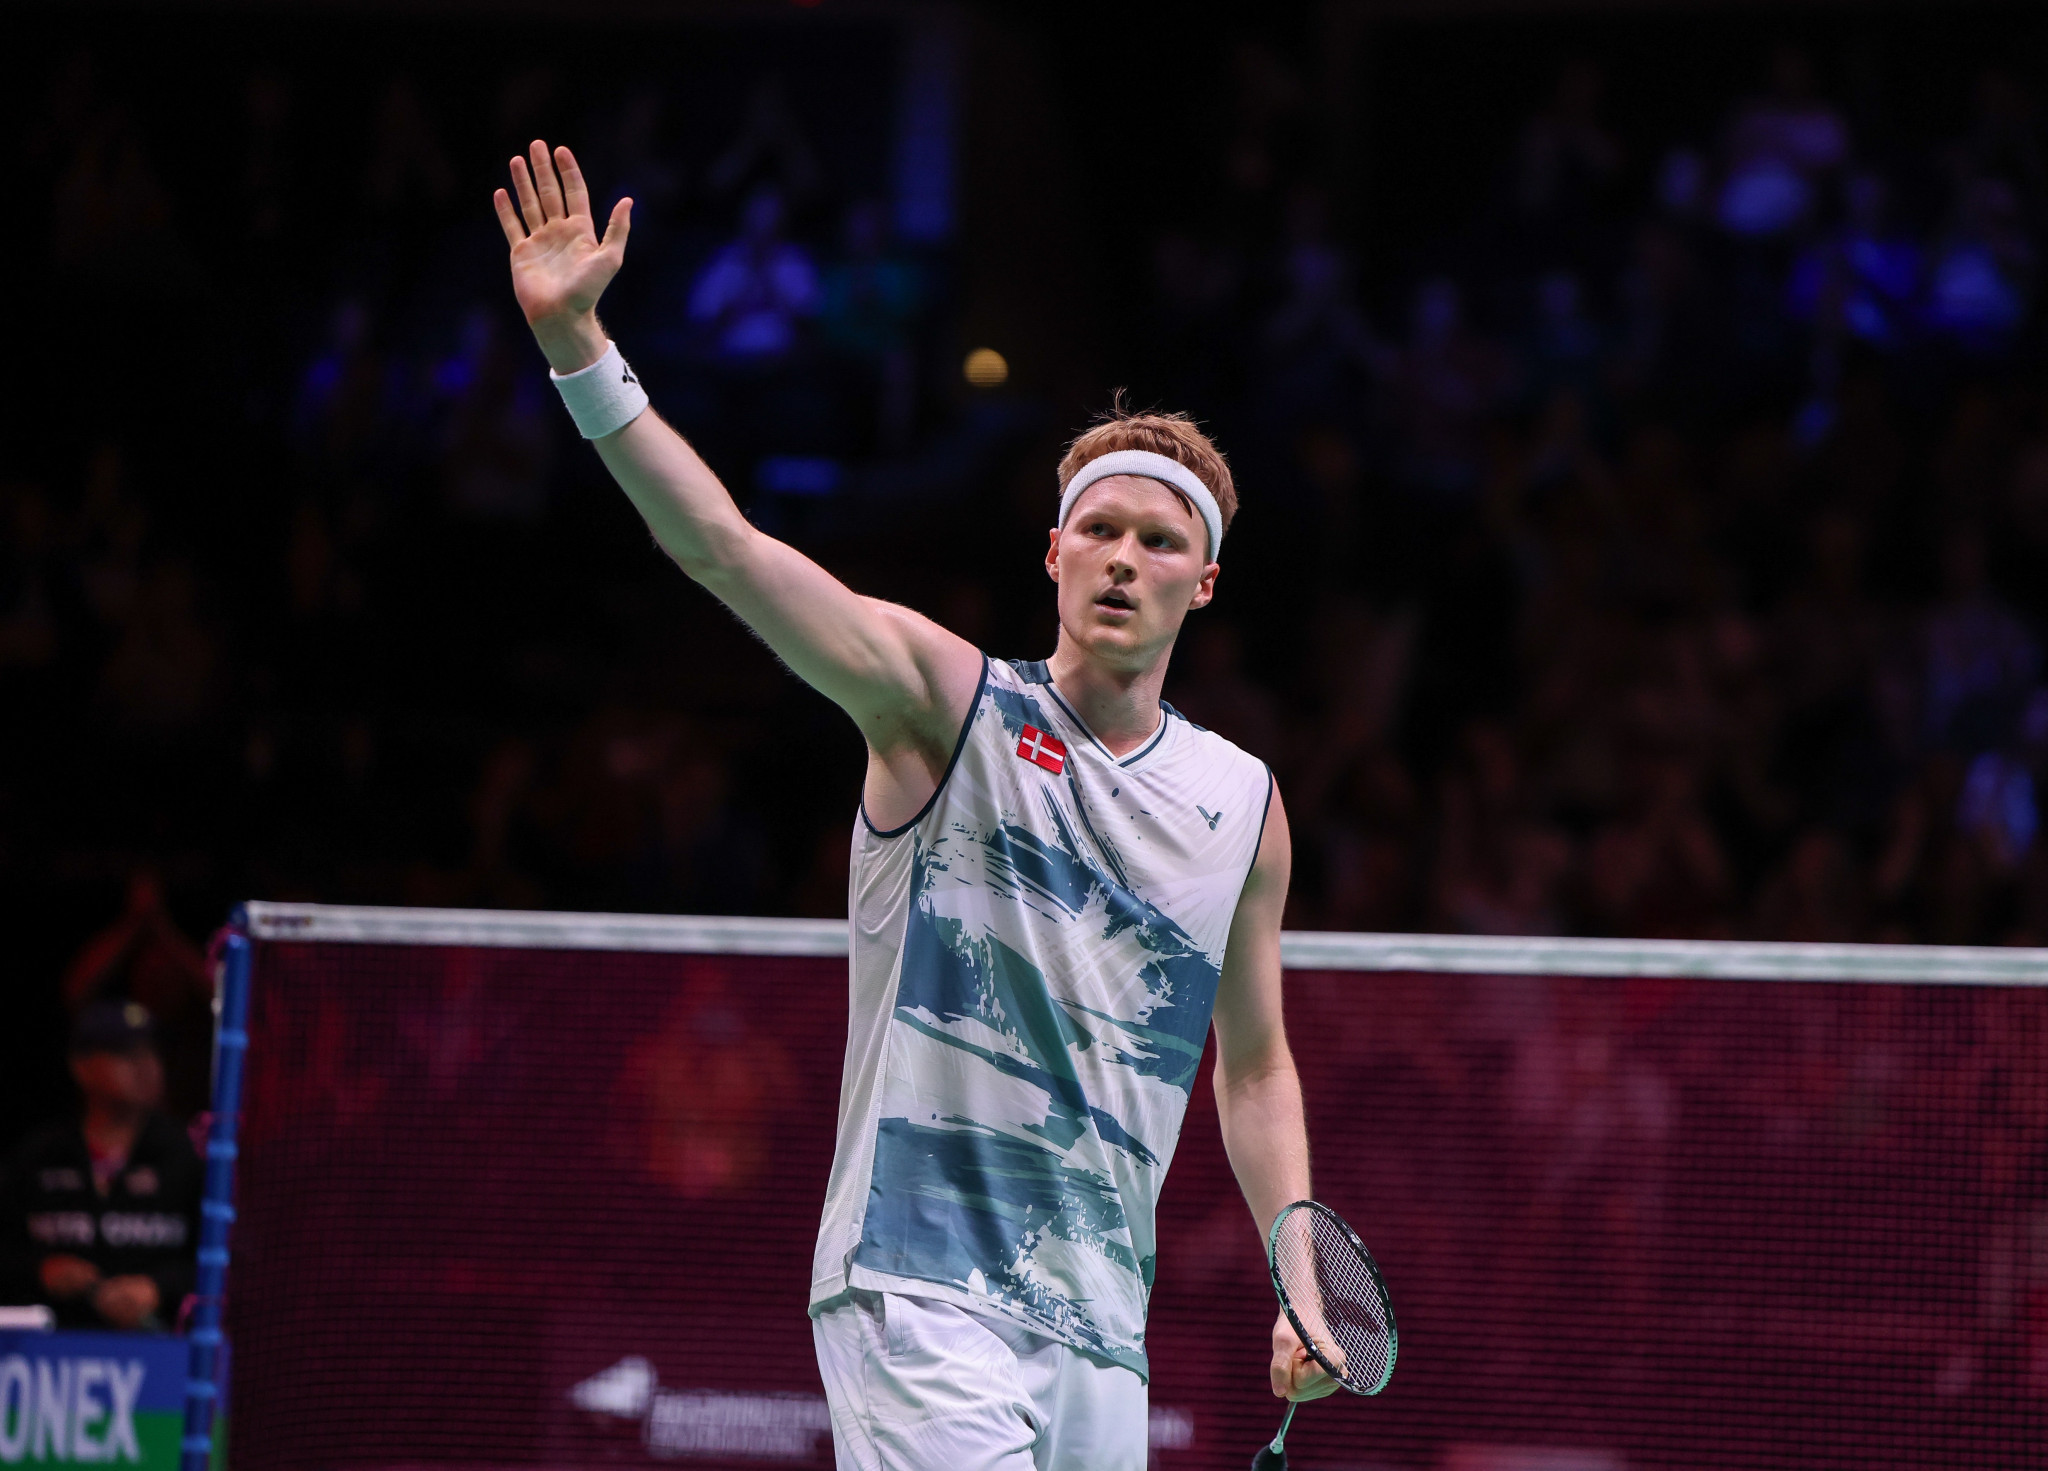 Home star Anders Antonsen waves to the crowd after his tense two-game second-round victory ©Badmintonphoto